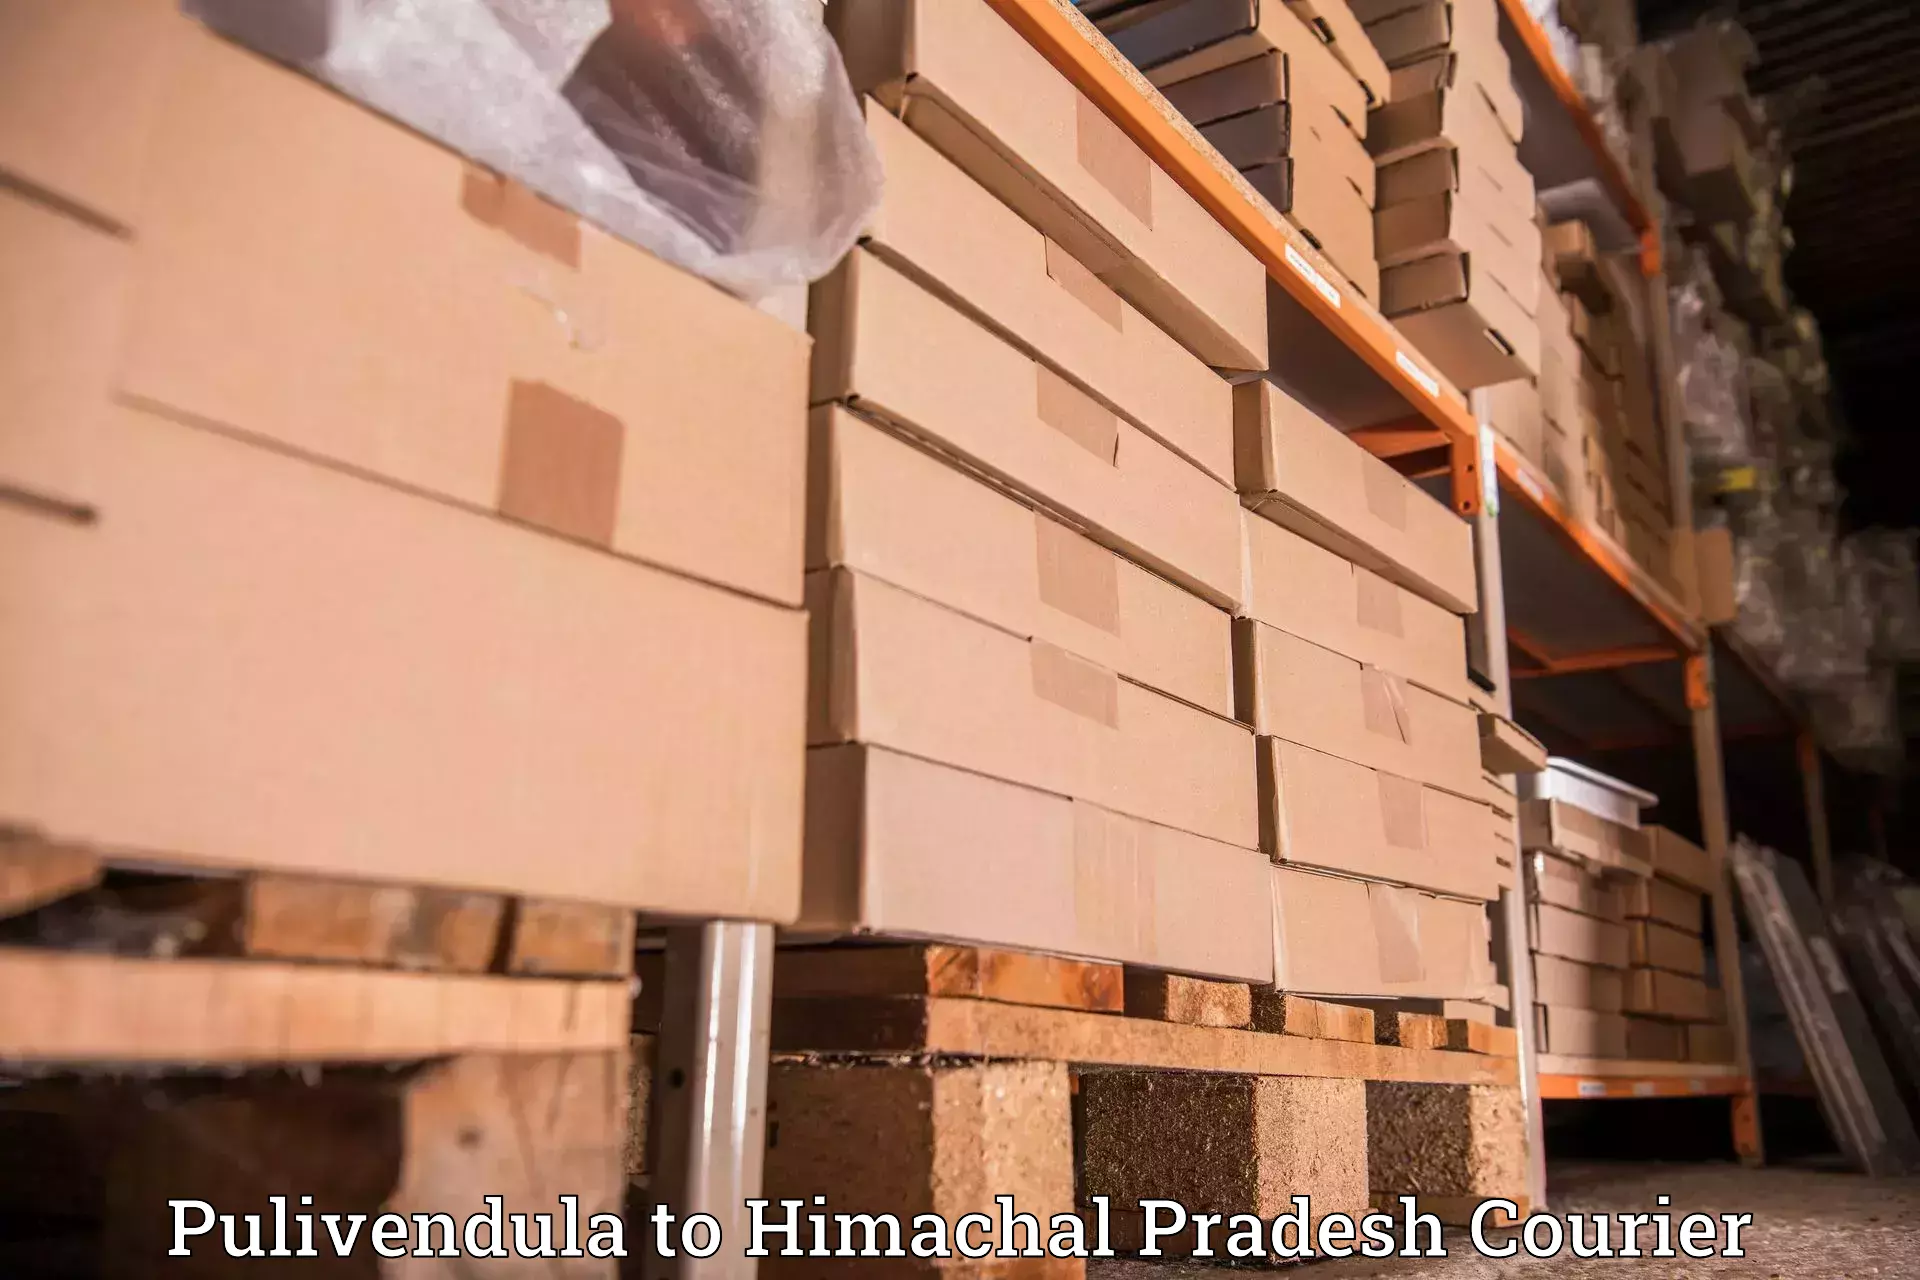 Express postal services in Pulivendula to Himachal Pradesh